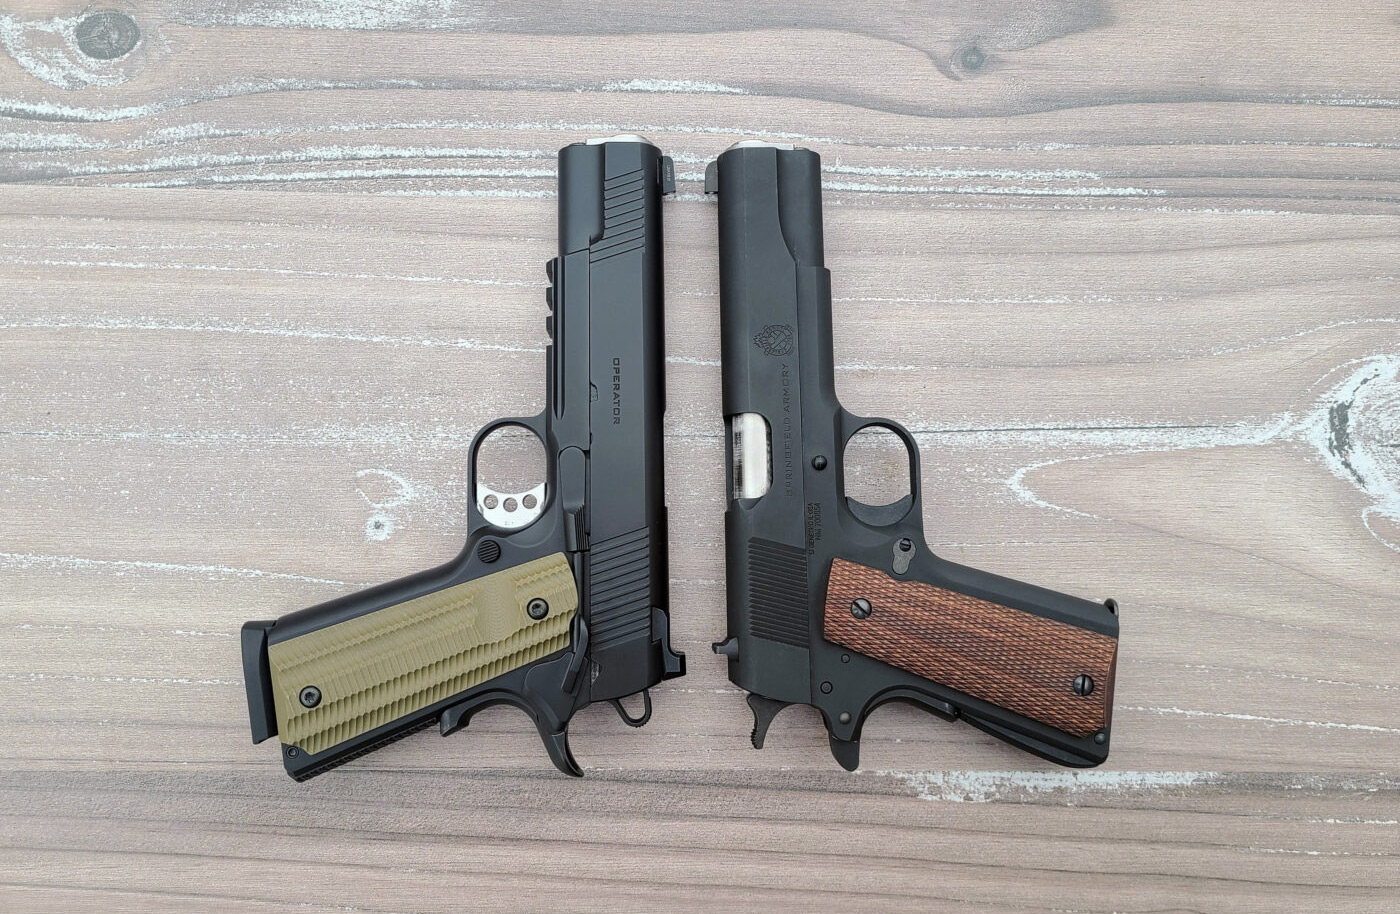 Comparing the Springfield Armory Mil-Spec 1911 and Operator 1911 pistols